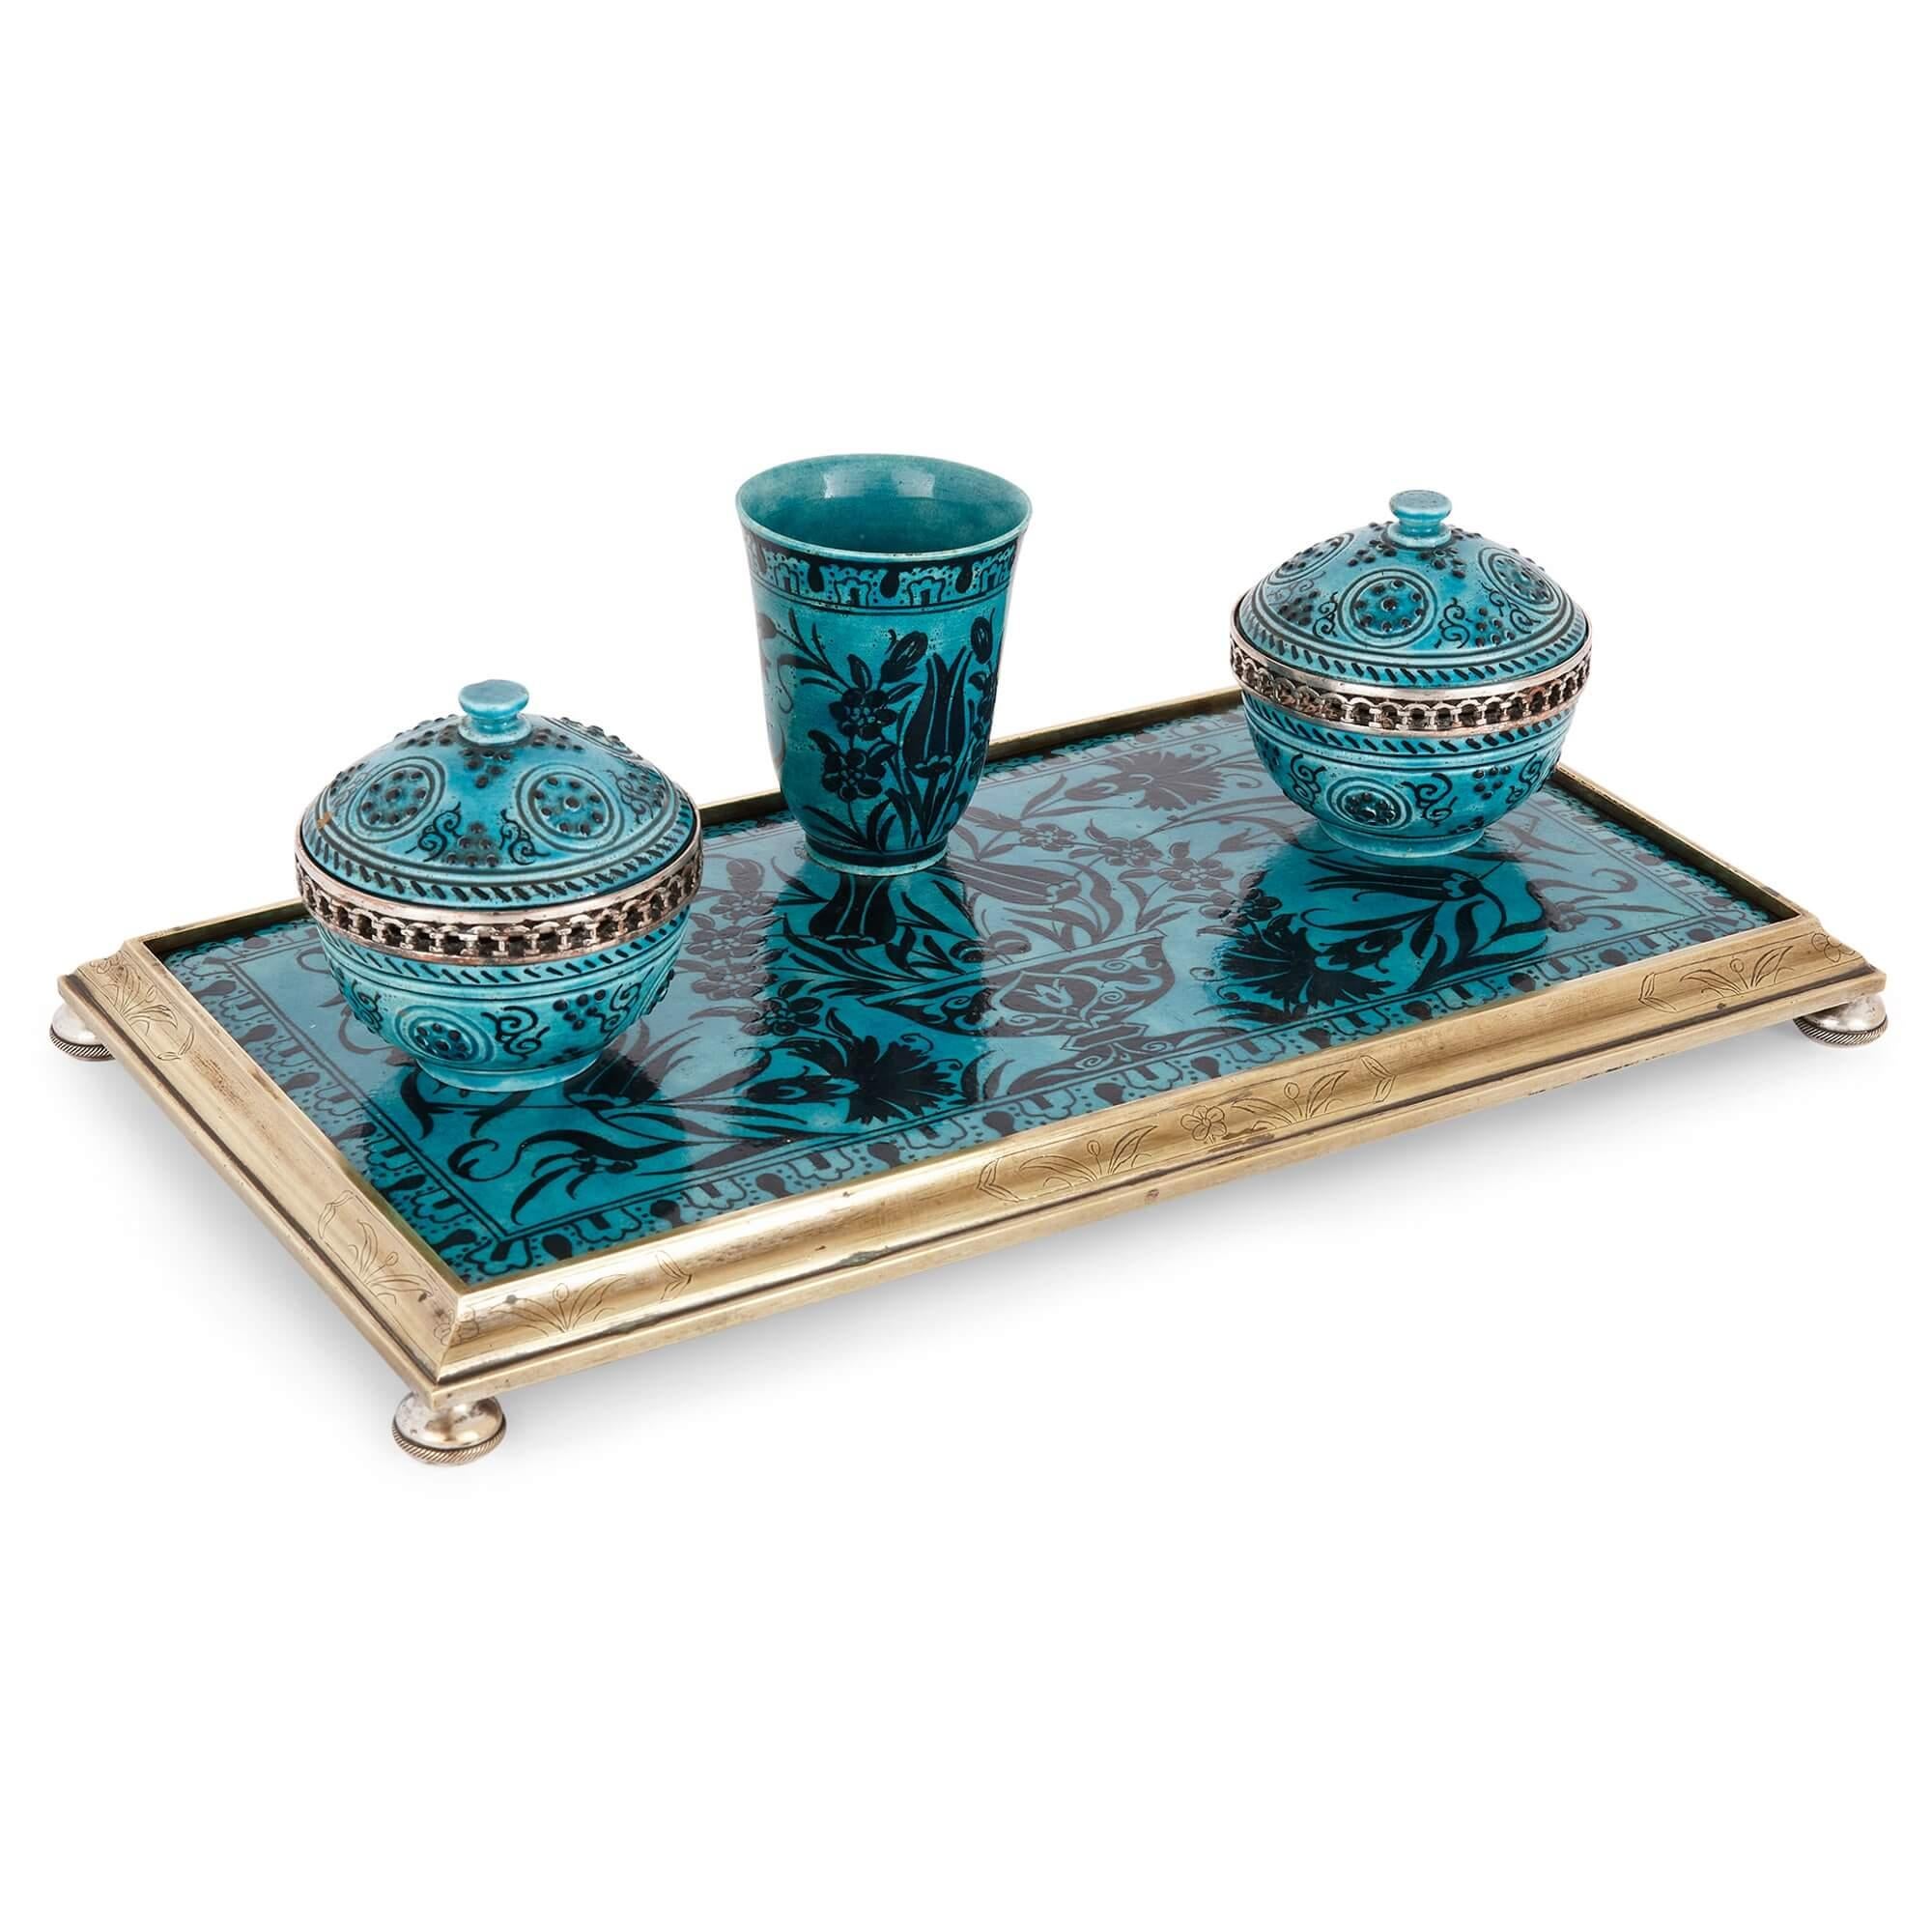 Iznik-style ceramic and brass-mounted ink stand
French, 19th Century
Height 10.5cm, width 34cm, depth 19cm

Revealing a vase and flowers contained in a border of repeating pattern-work, with two lidded inkwells flanking a central holder, this